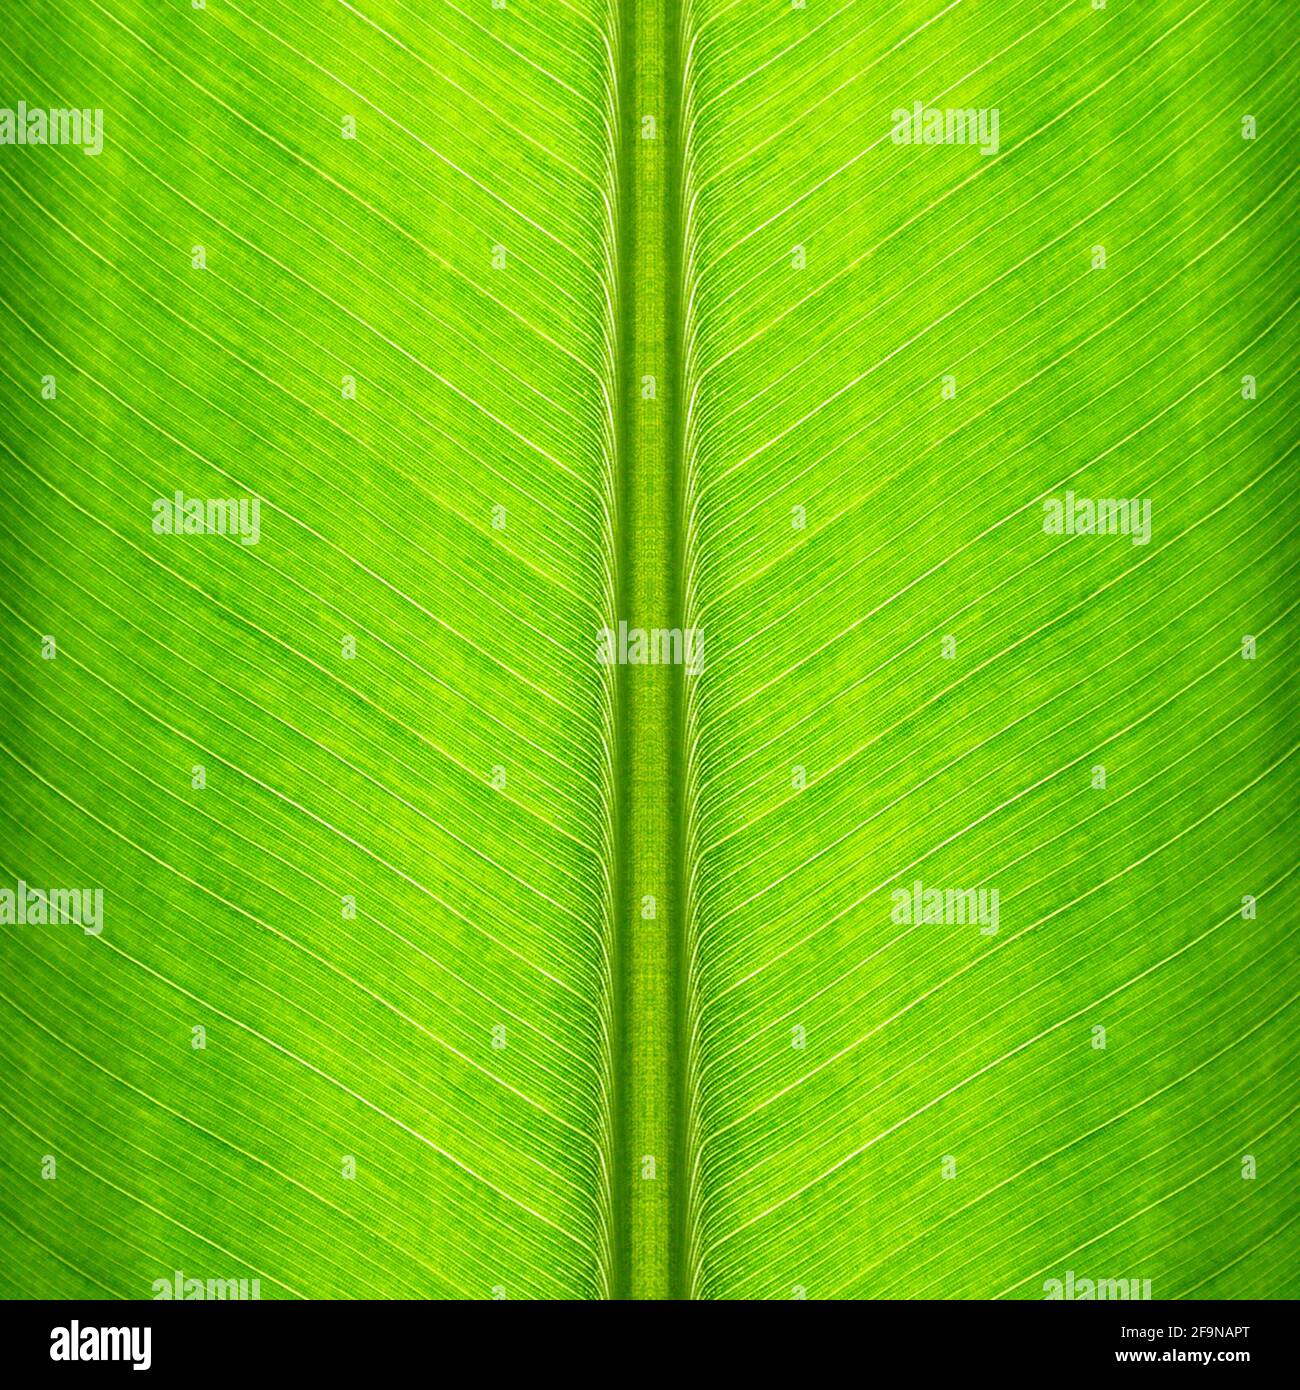 Green banana leaf texture as natural background Stock Photo